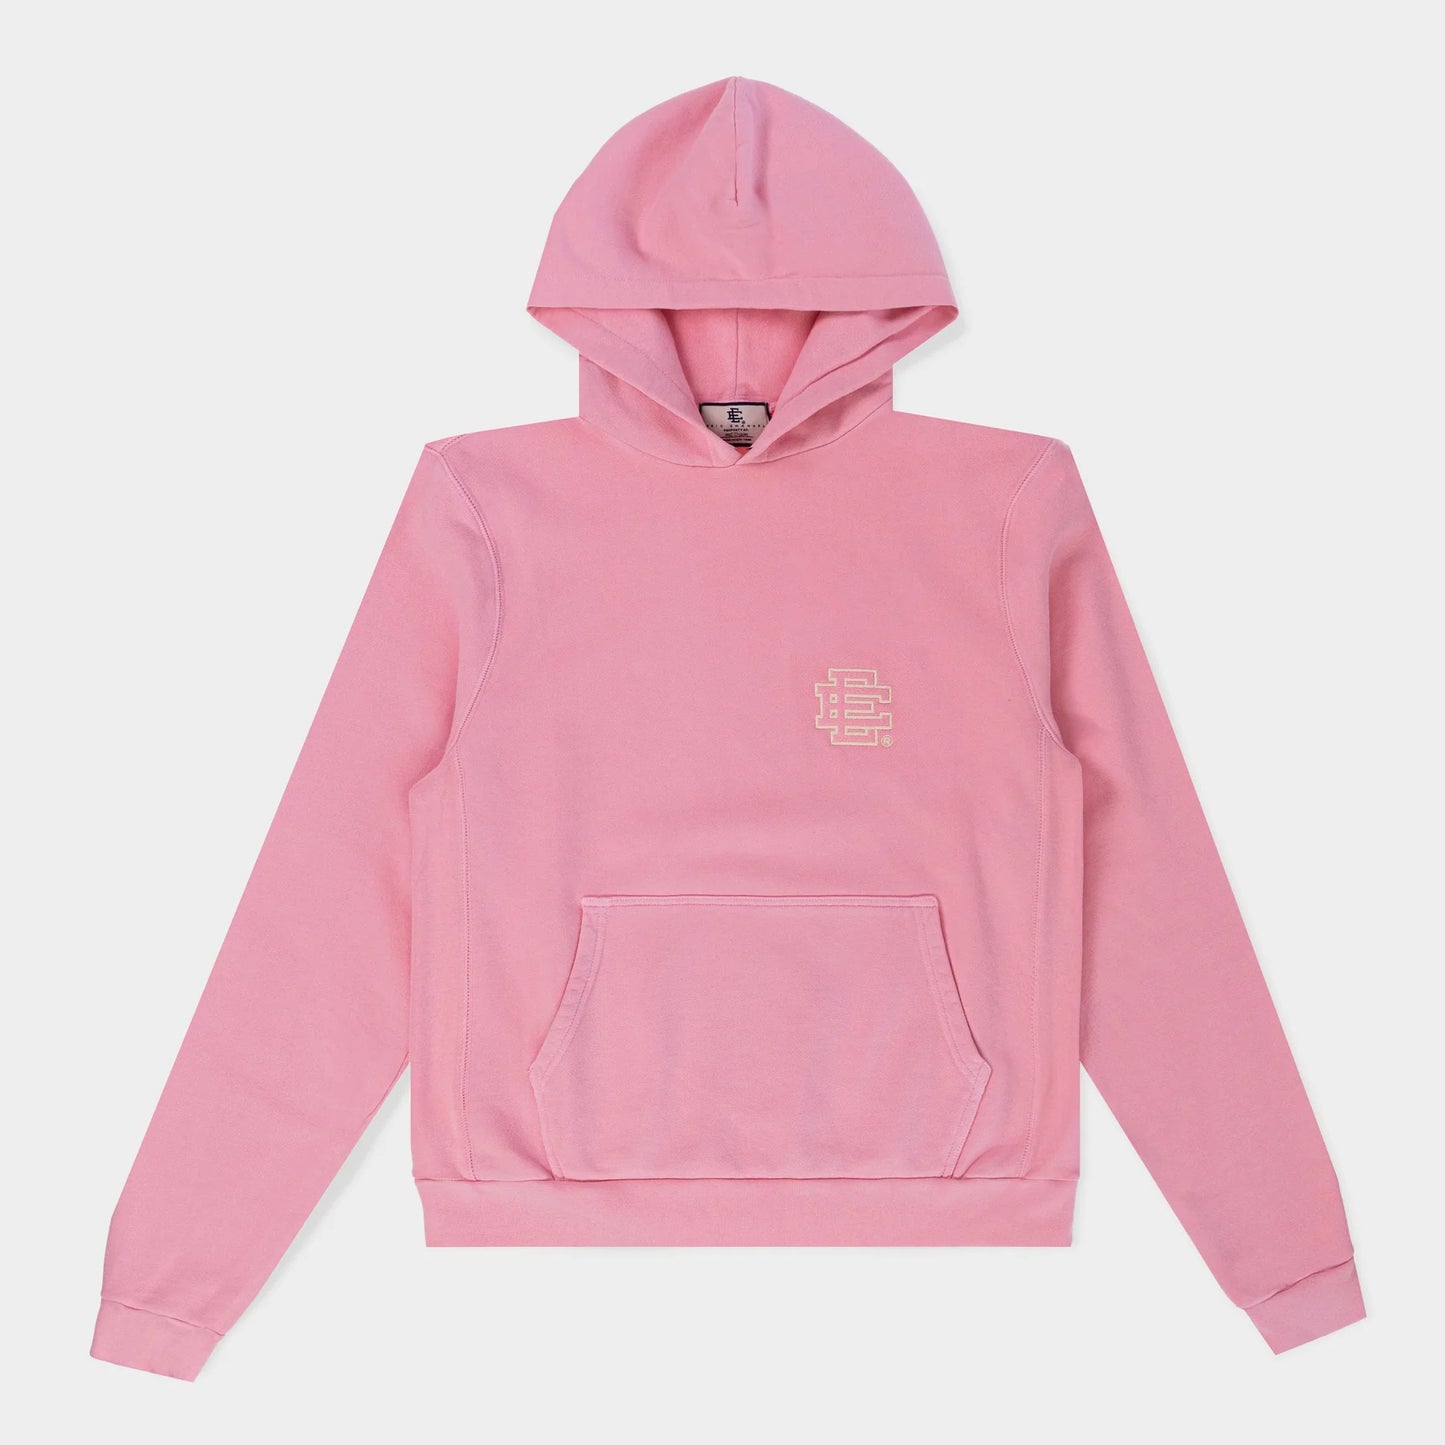 Eric Emanuel Pink Embroidery Hoodie Front View